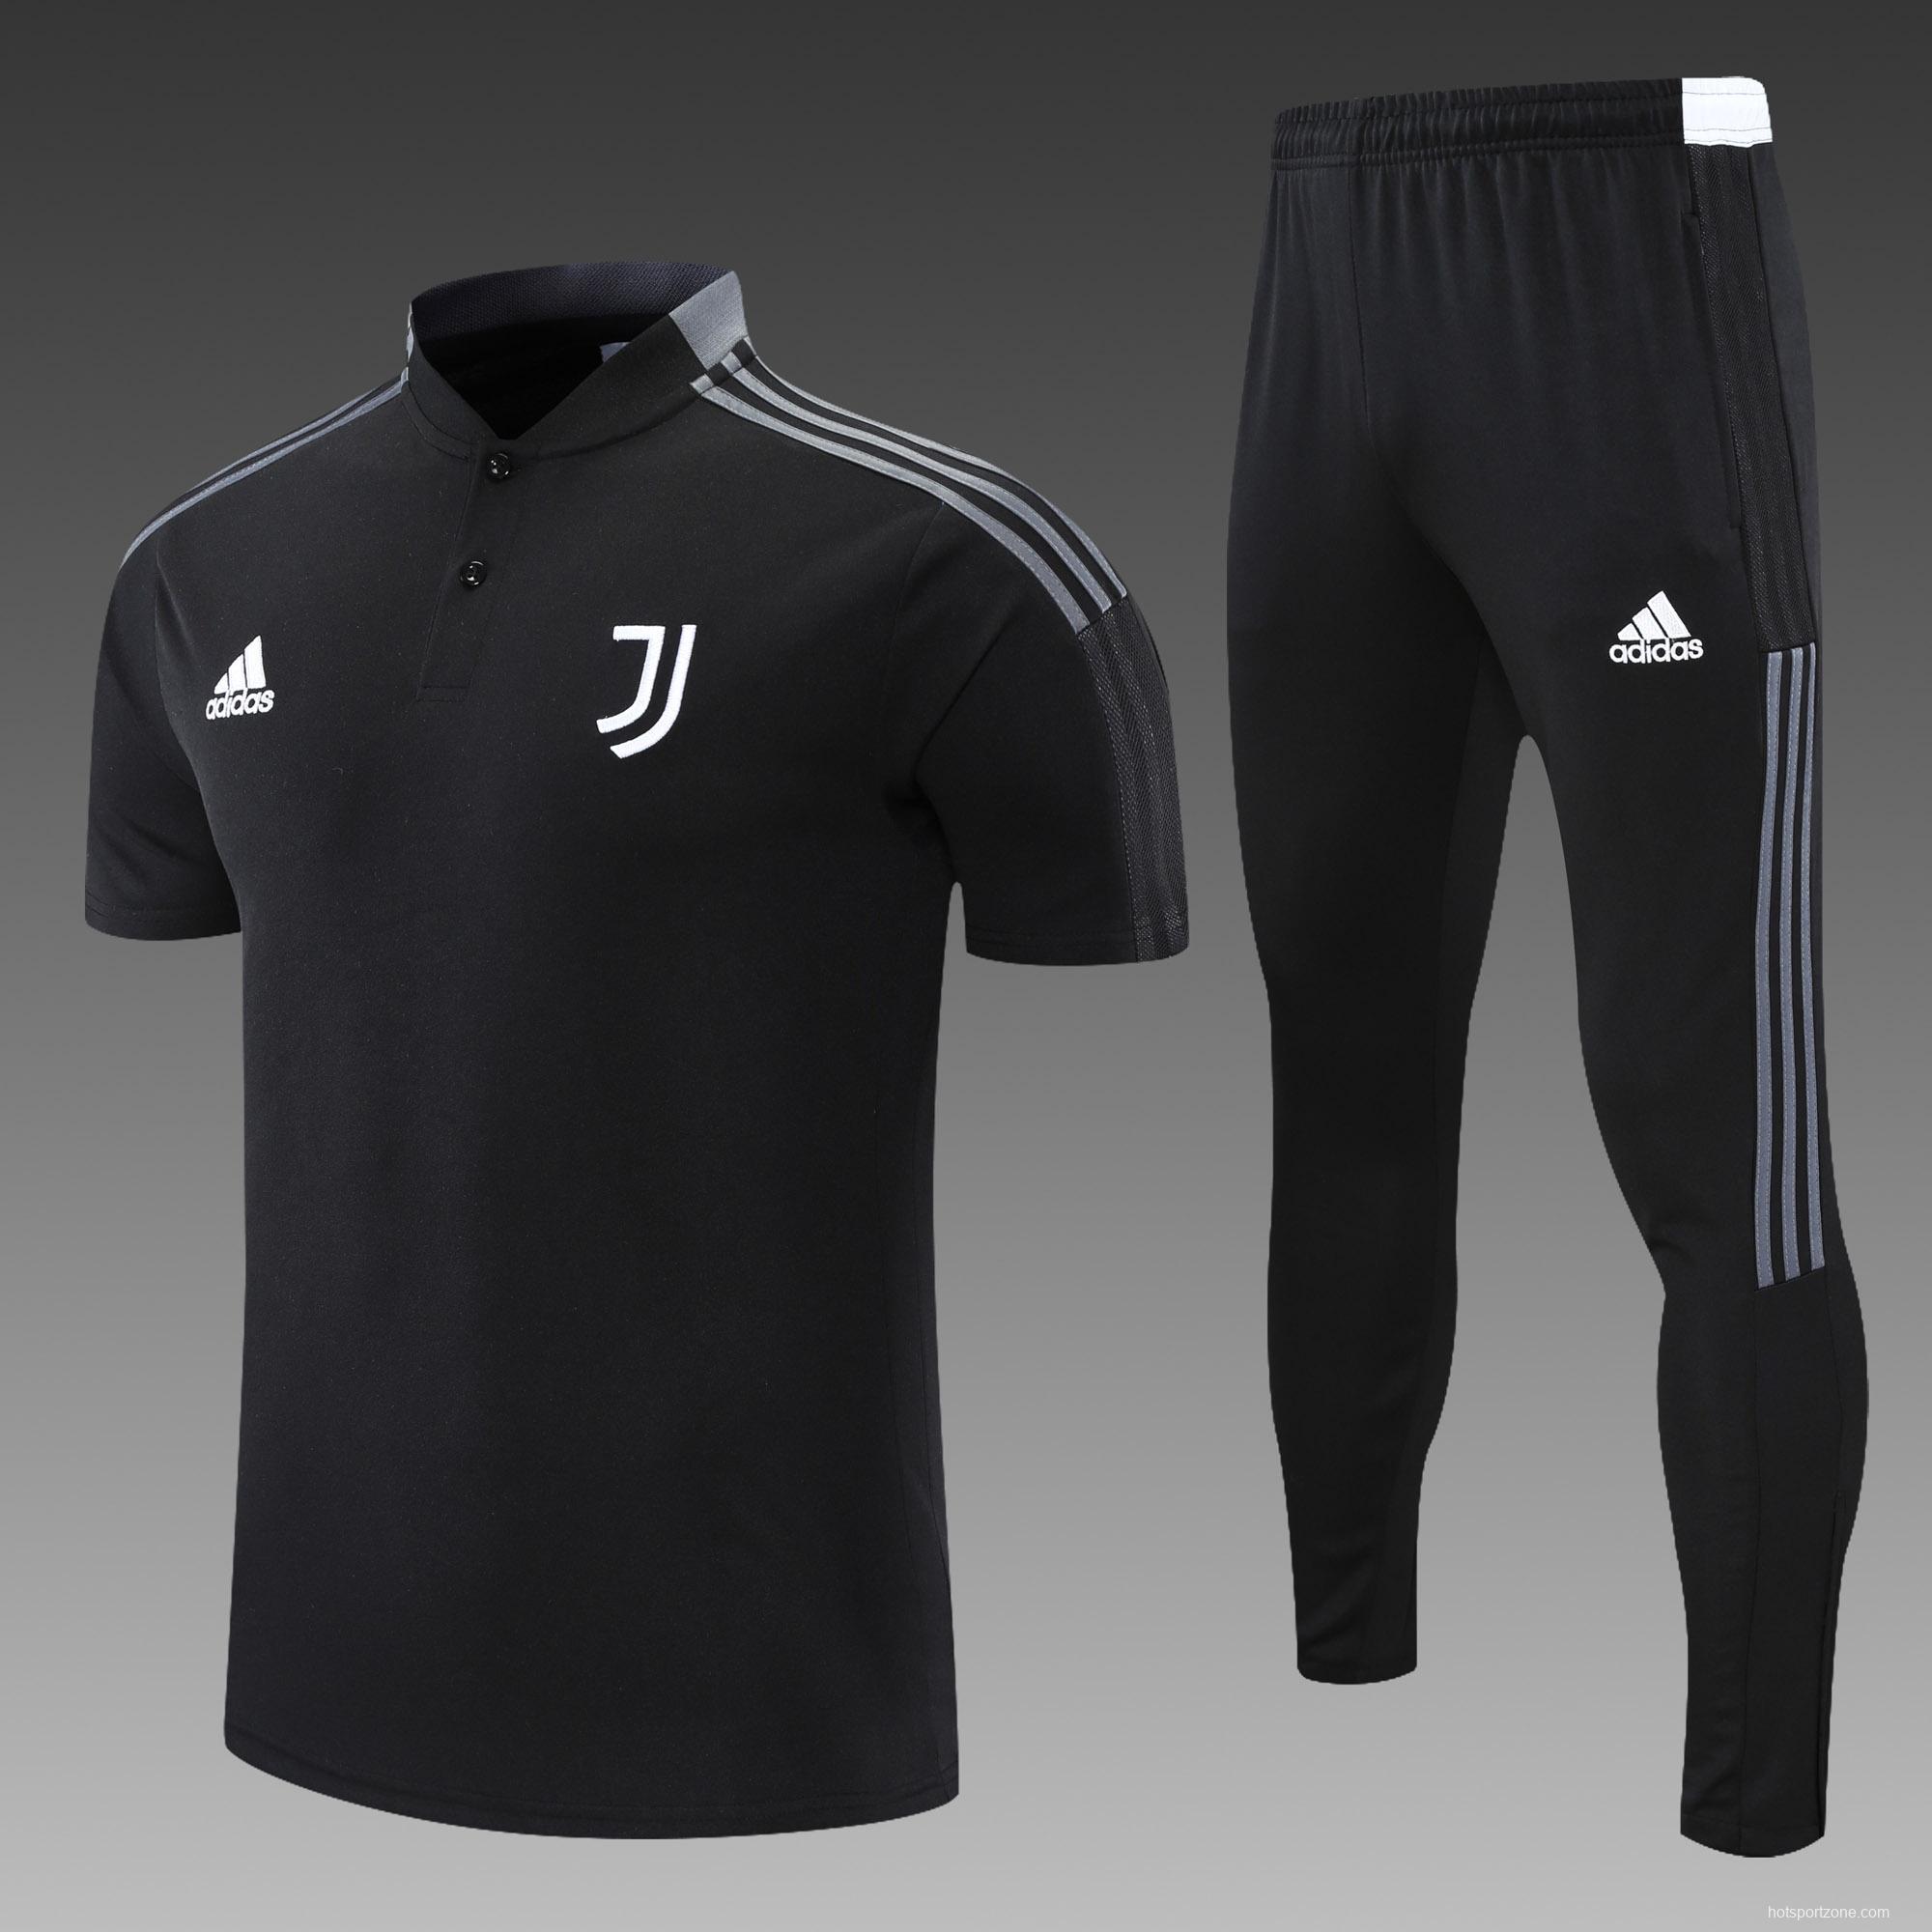 Juventus POLO kit Black(not supported to be sold separately)